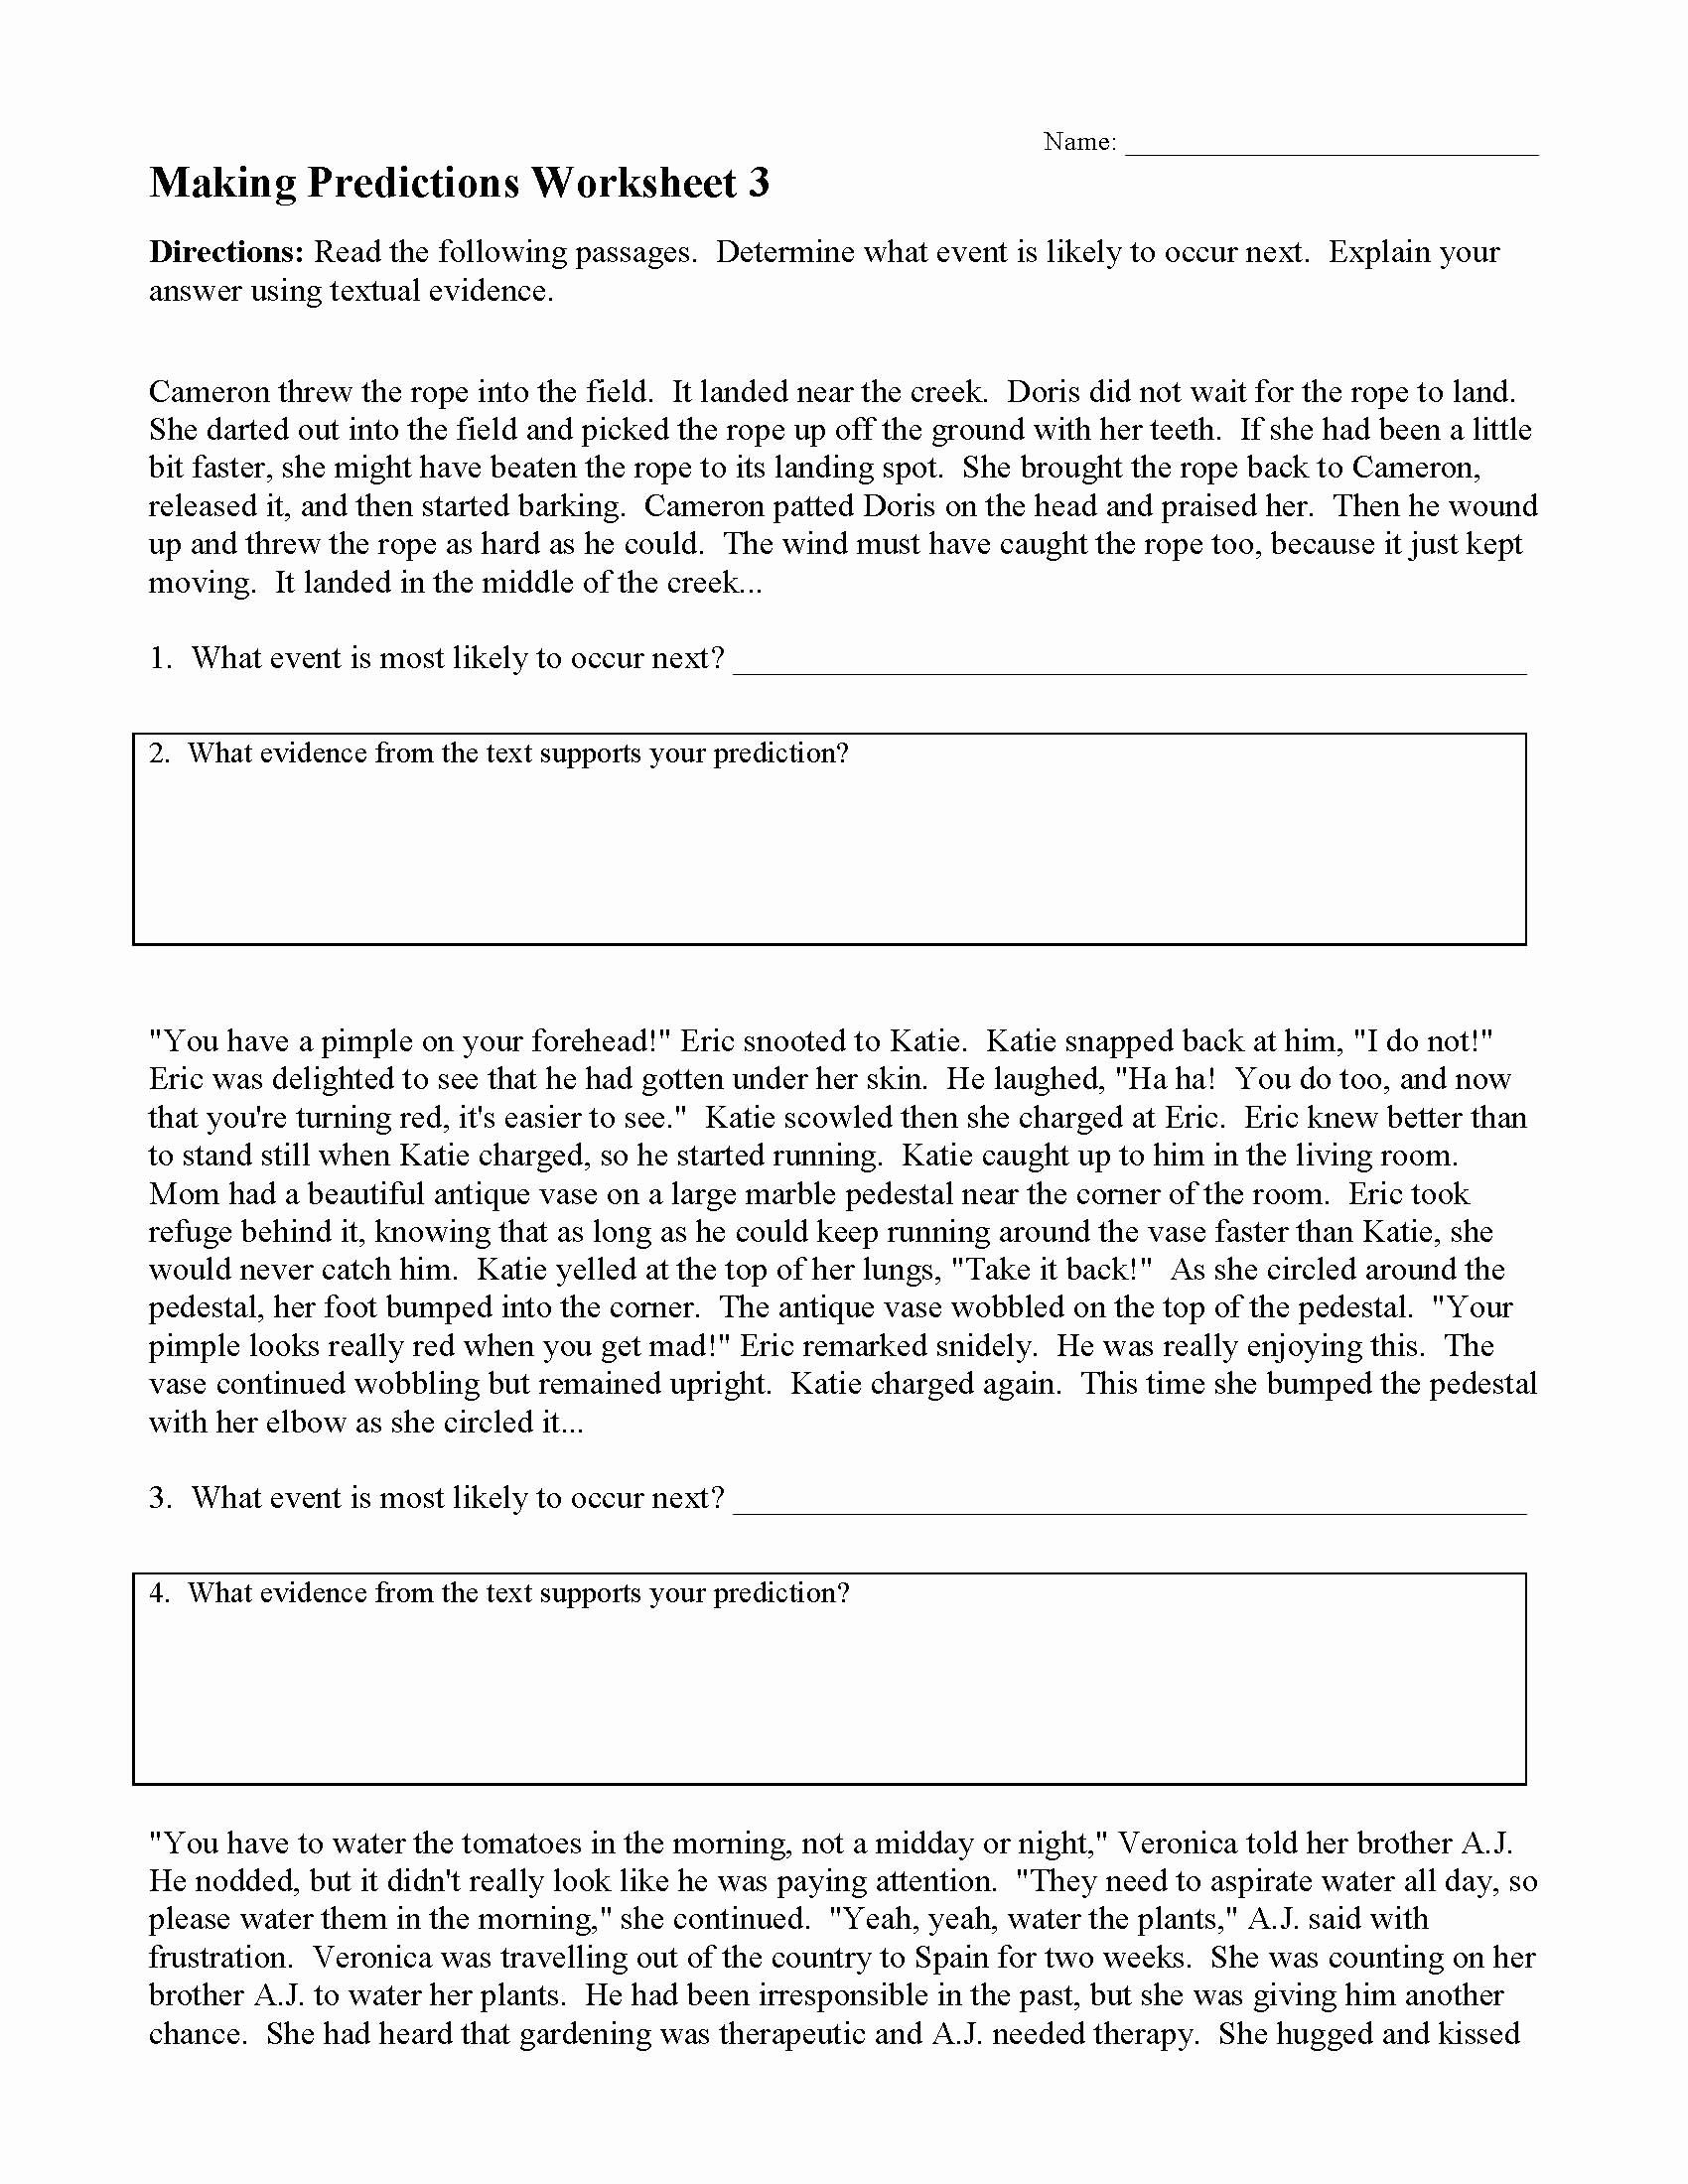 Making Predictions Worksheets 2nd Grade Awesome 20 Making Predictions Worksheet 2nd Grade